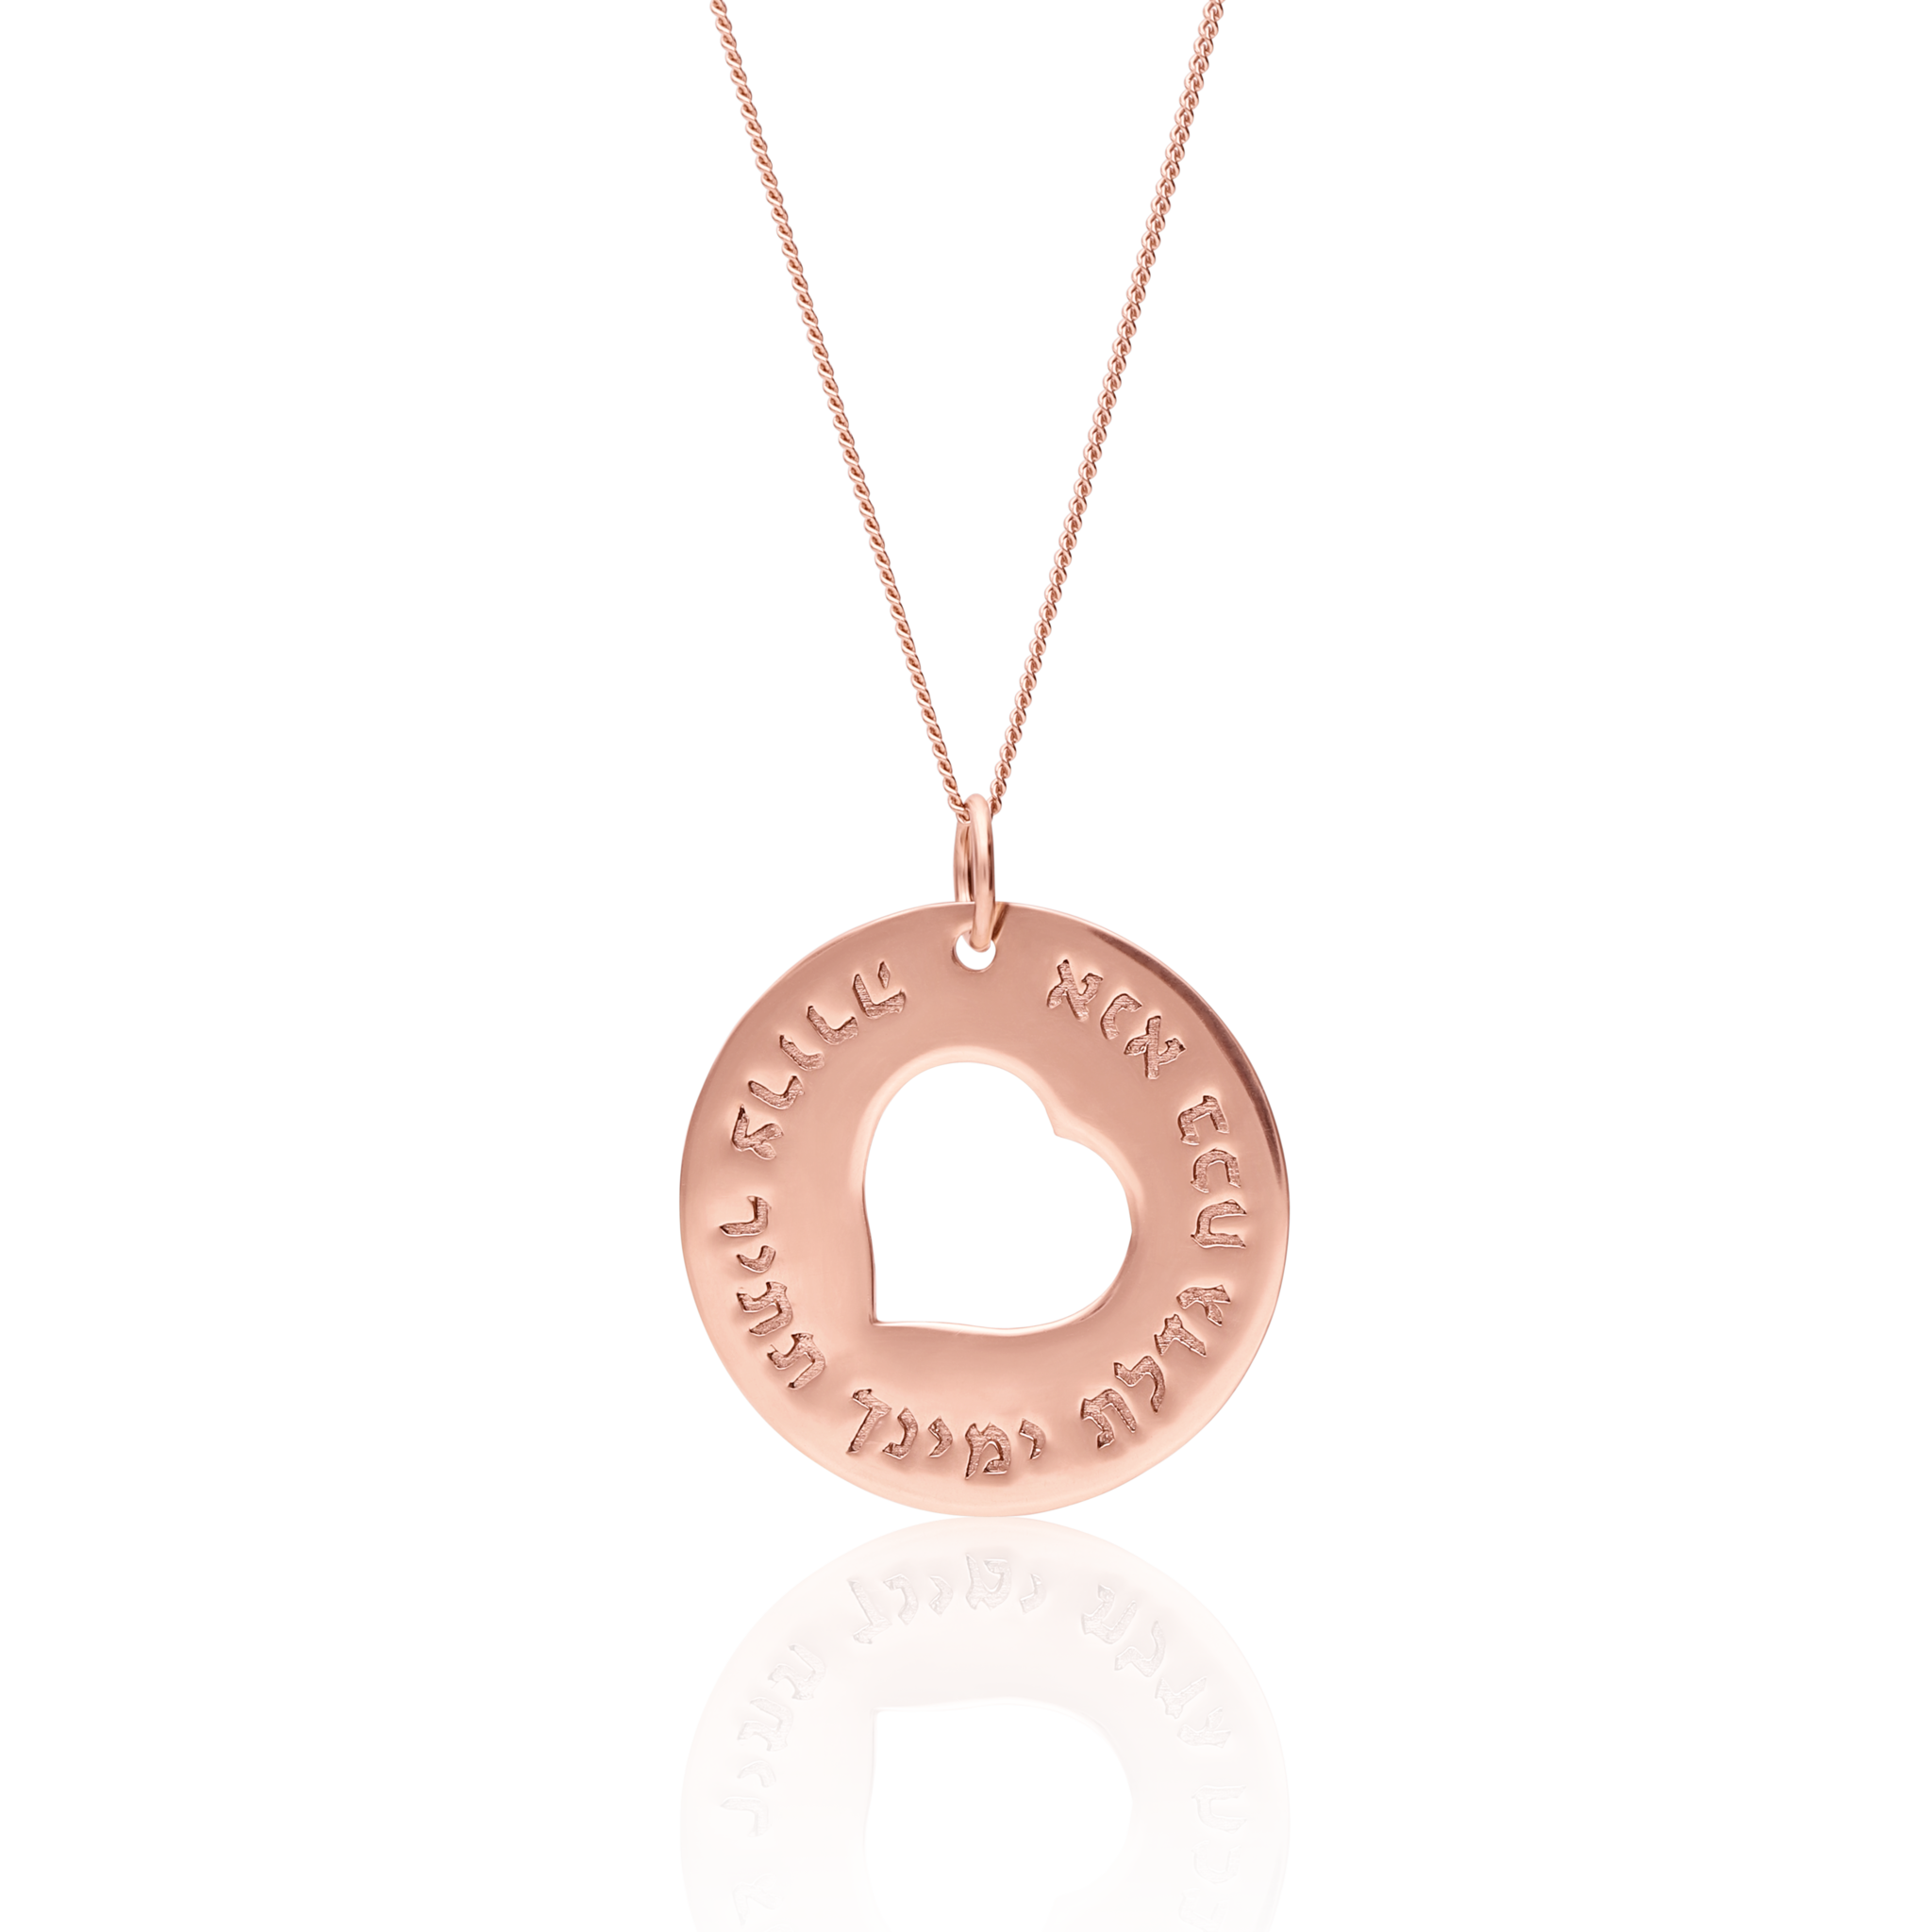 Heart of Israel Necklace - Rose Gold (7243656659094)